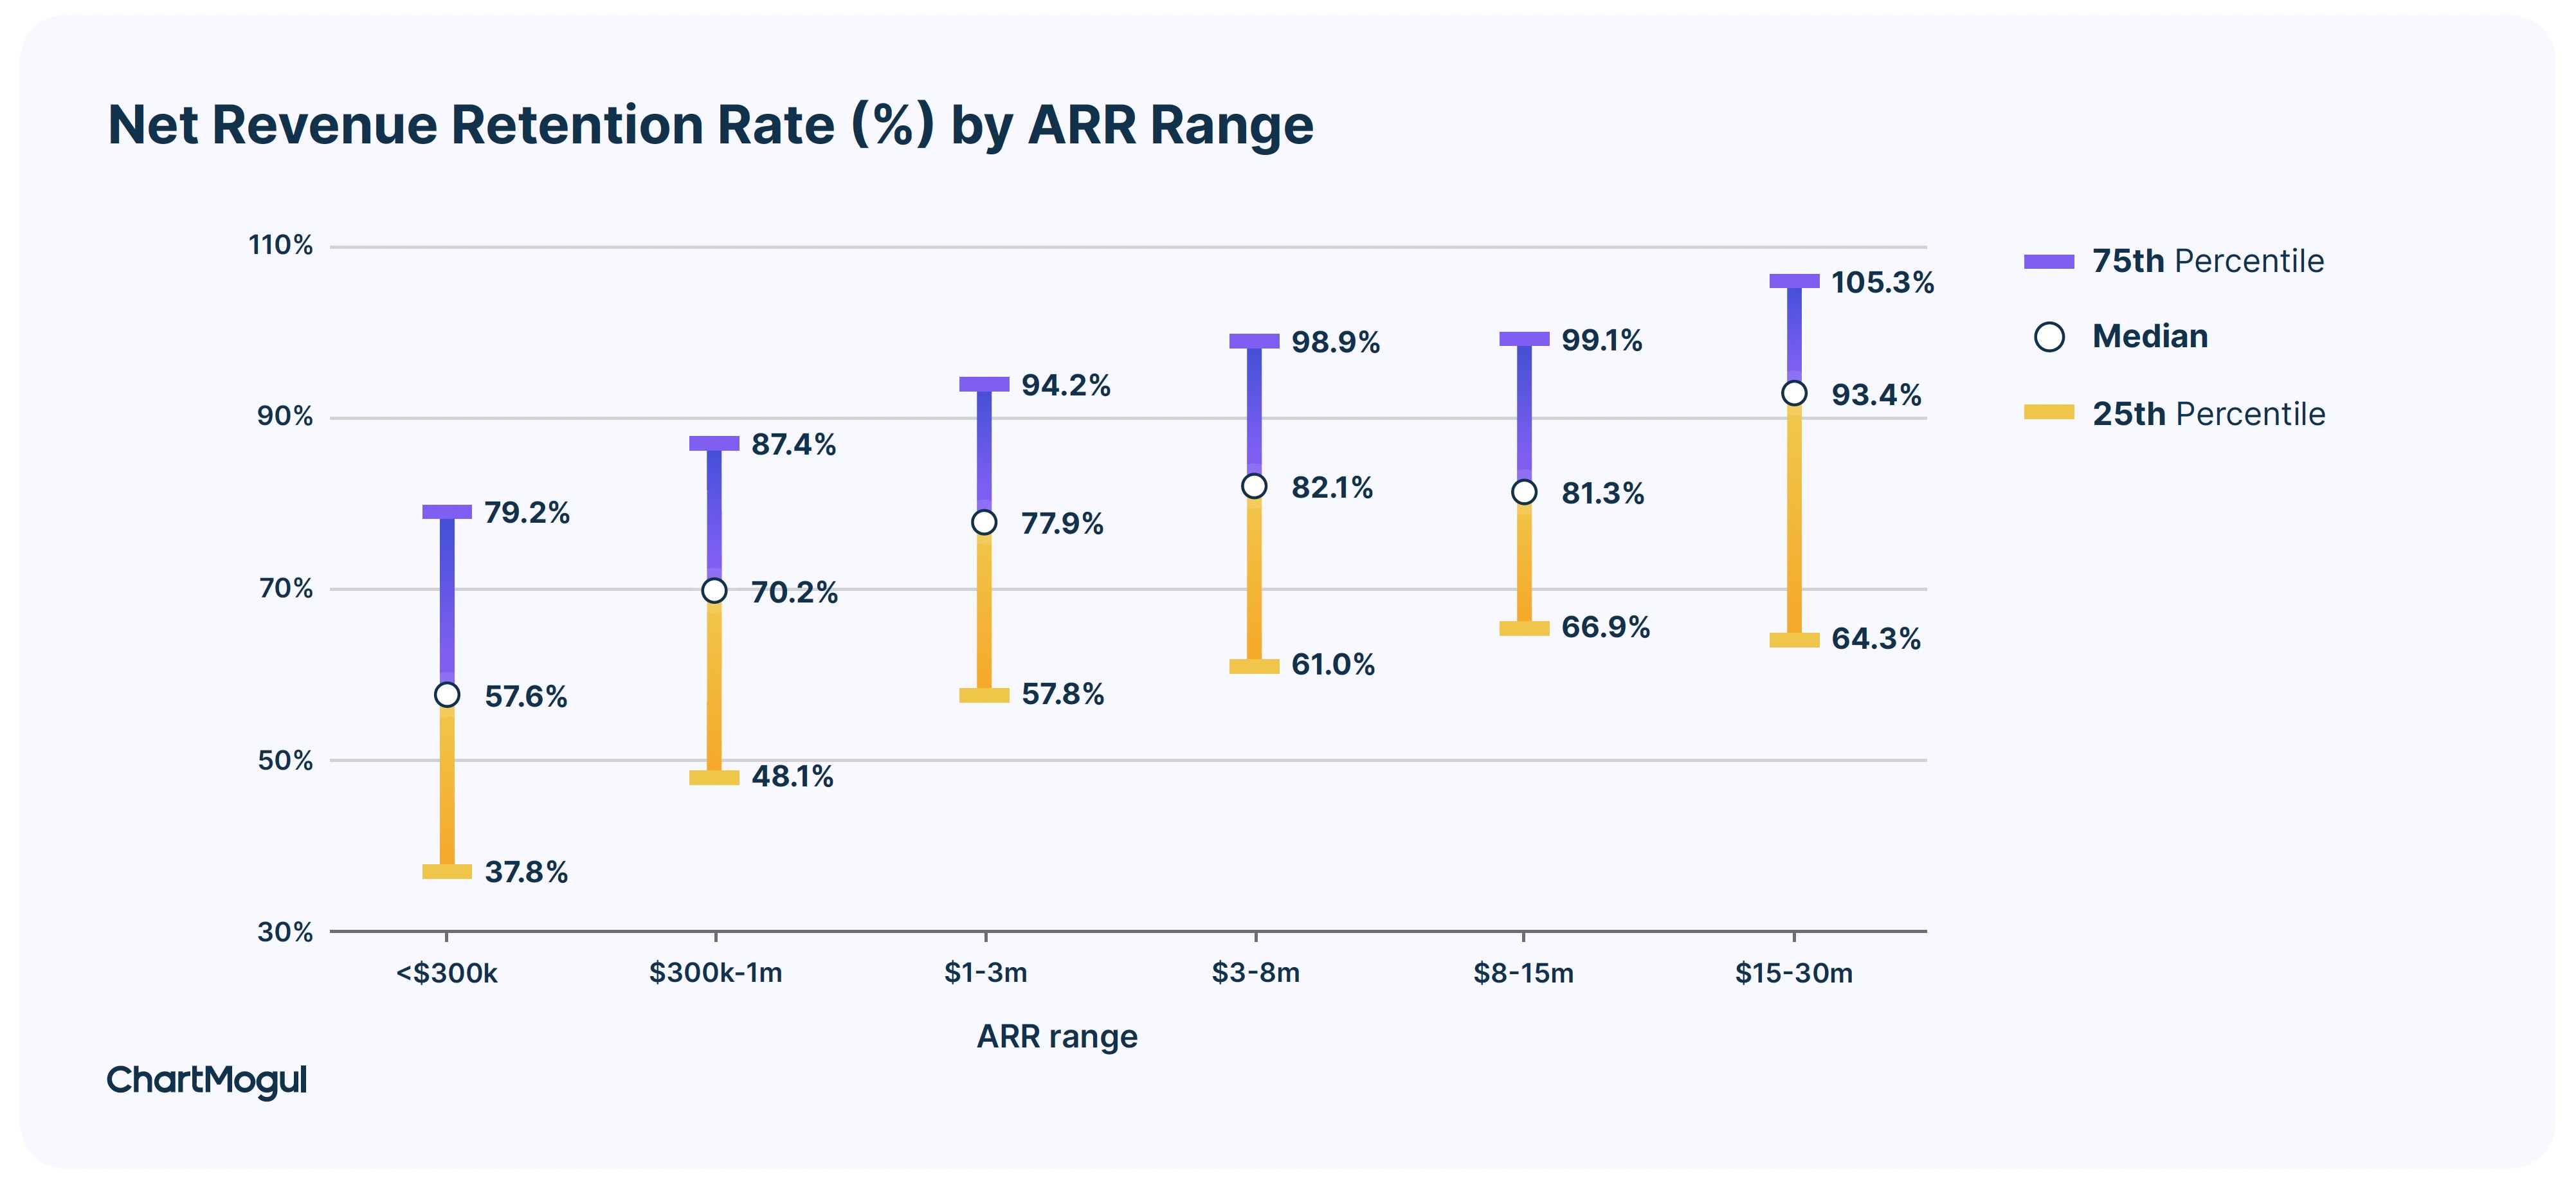 Net income retention rate by ARR range (%)